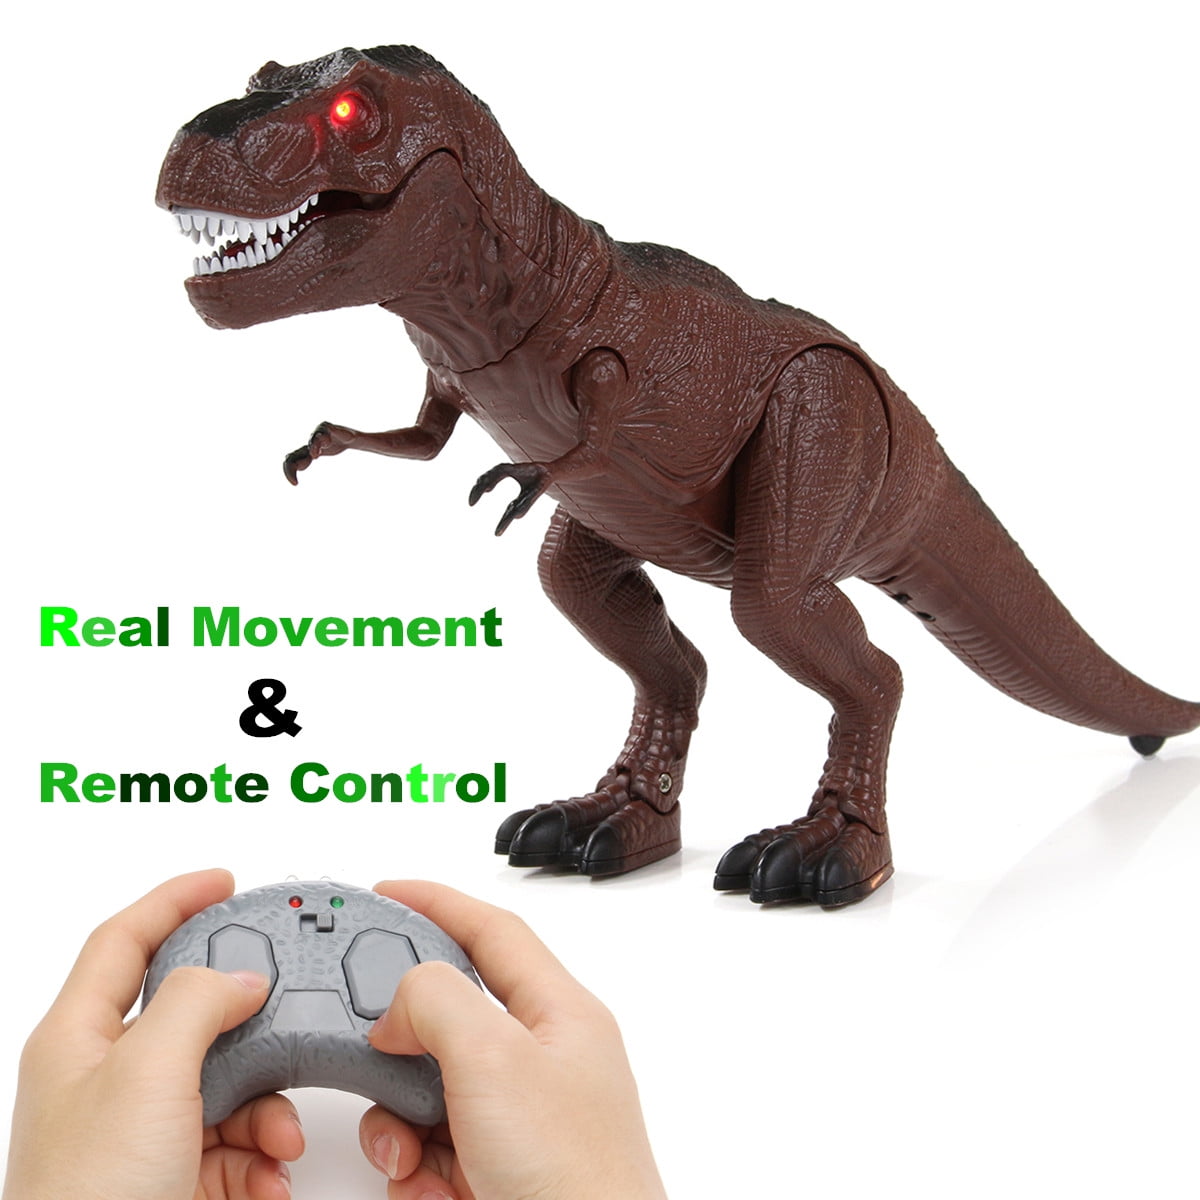 Details about  / Remote Control Dinosaur Electric Toy for Kids RC Realistic T-REX Dinosaur Toys